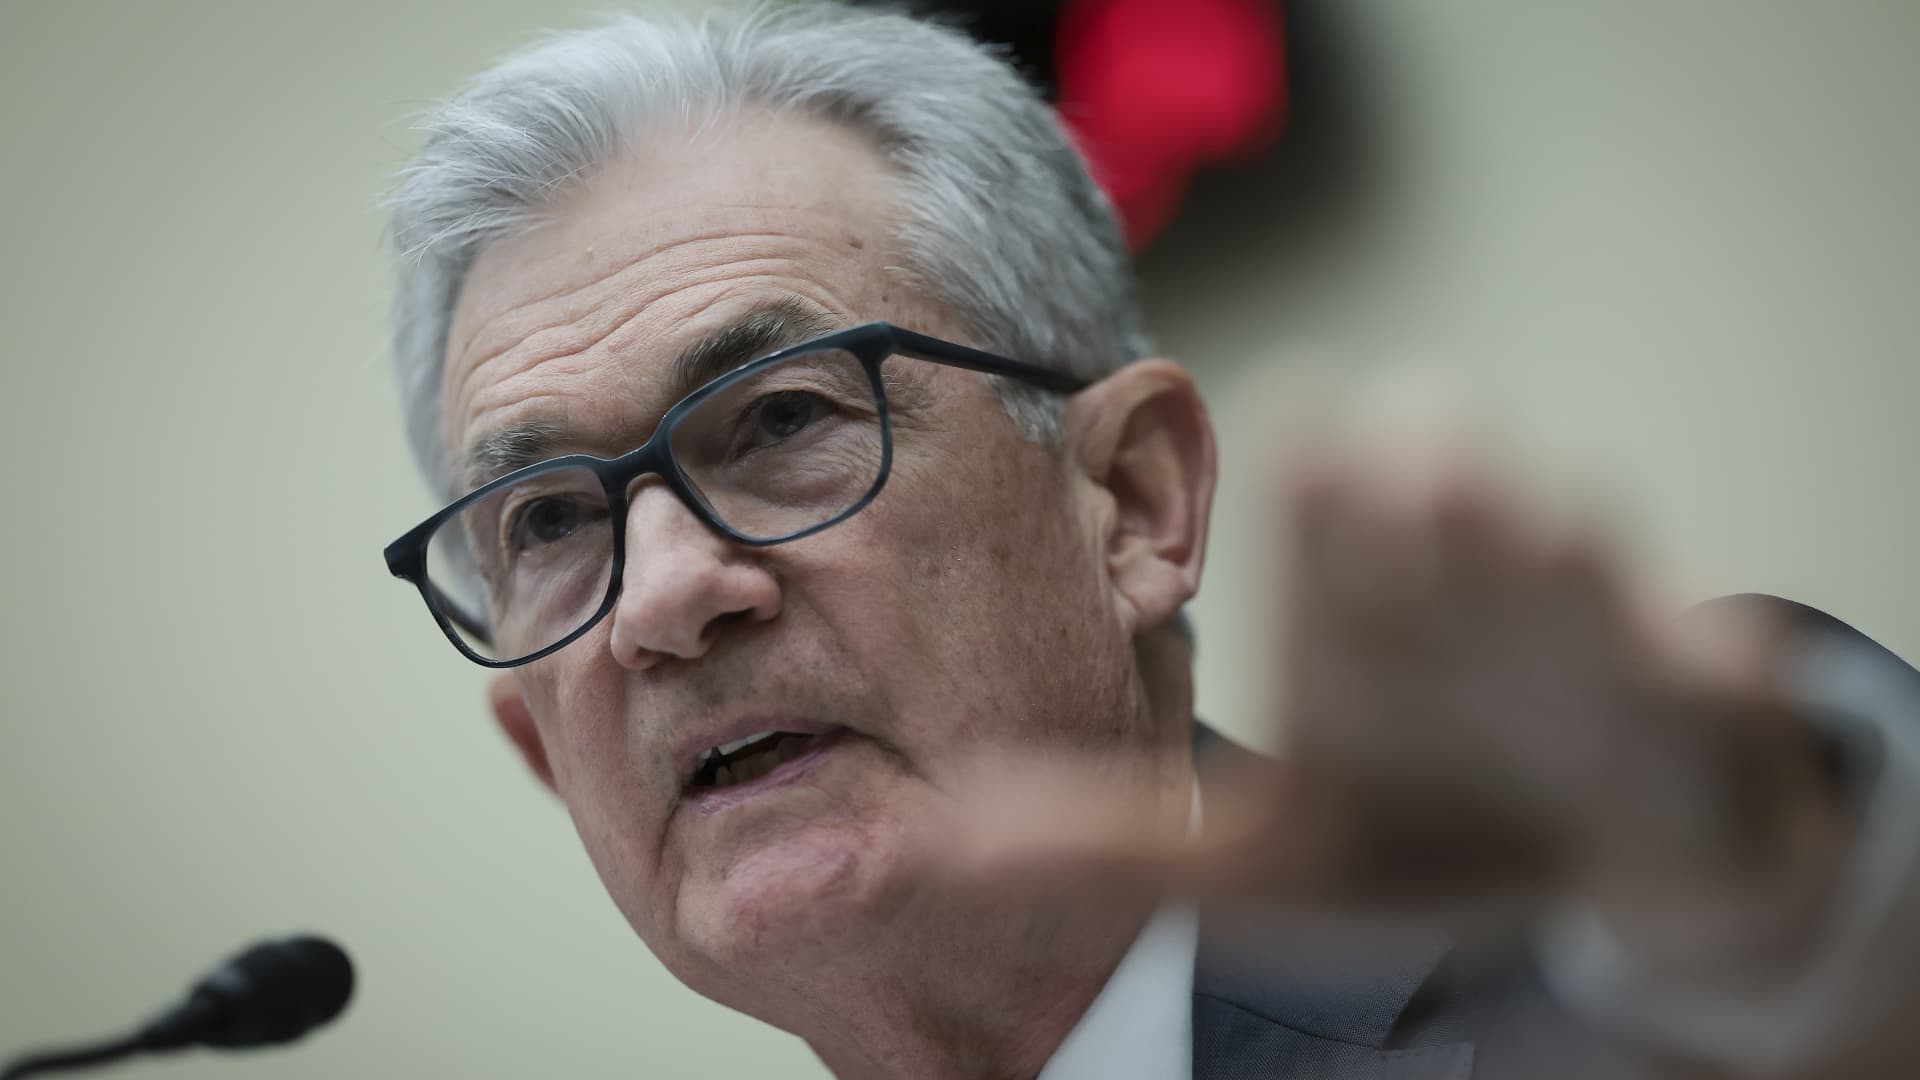 Here’s what to expect from the Federal Reserve meeting Wednesday